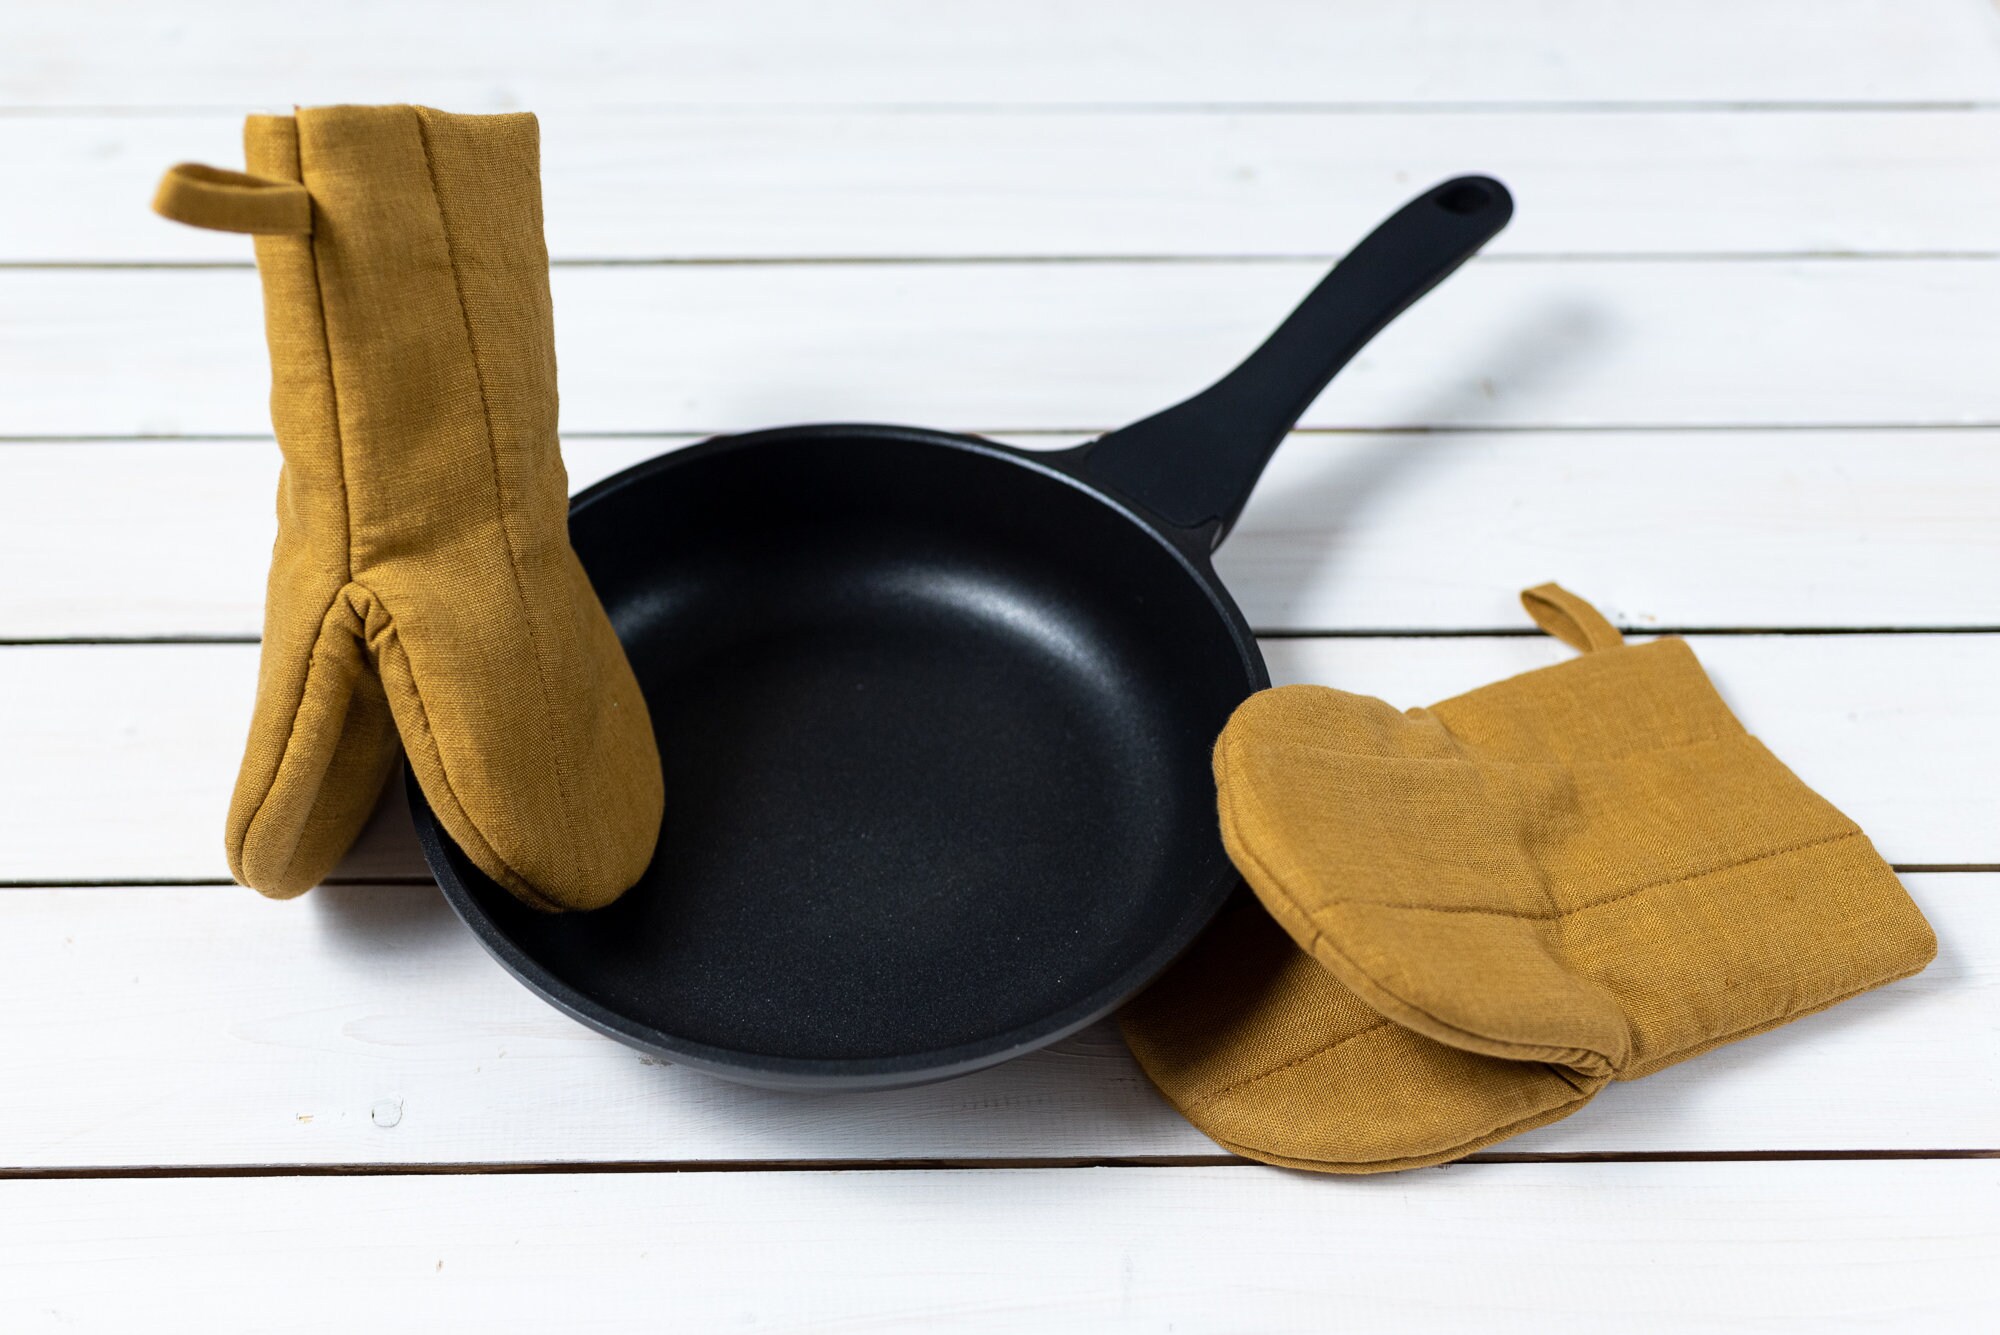 Mustard Color Oven Mitts Linen Oven Mits Kitchen Oven 